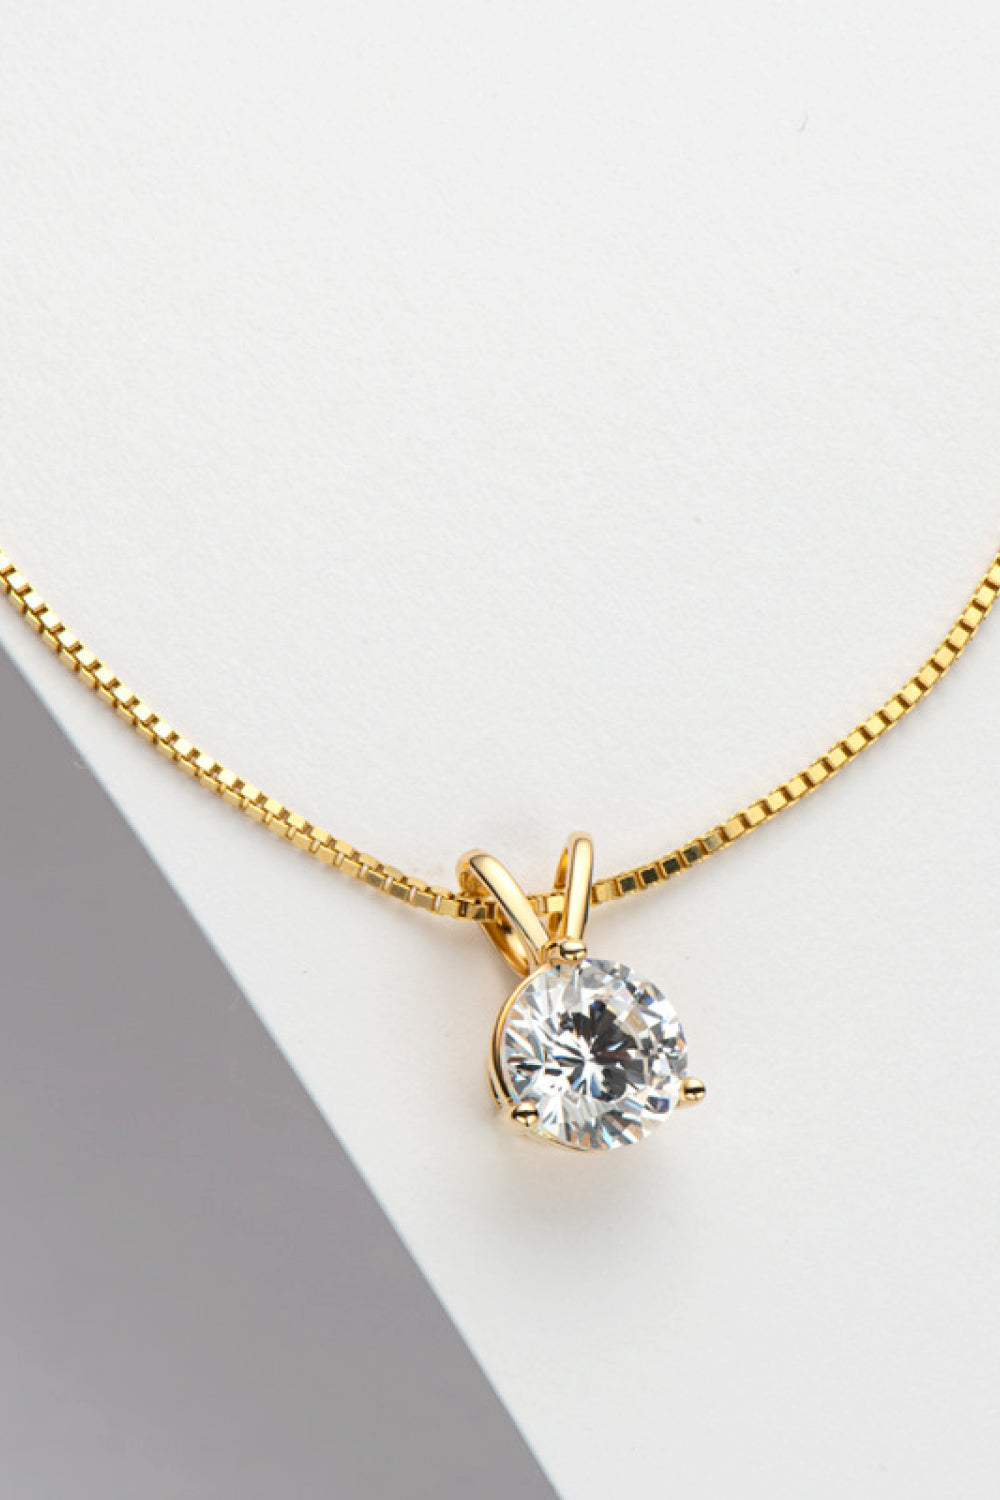 Adored Show Off 1 Carat Moissanite Pendant Necklace - Tophatter Deals